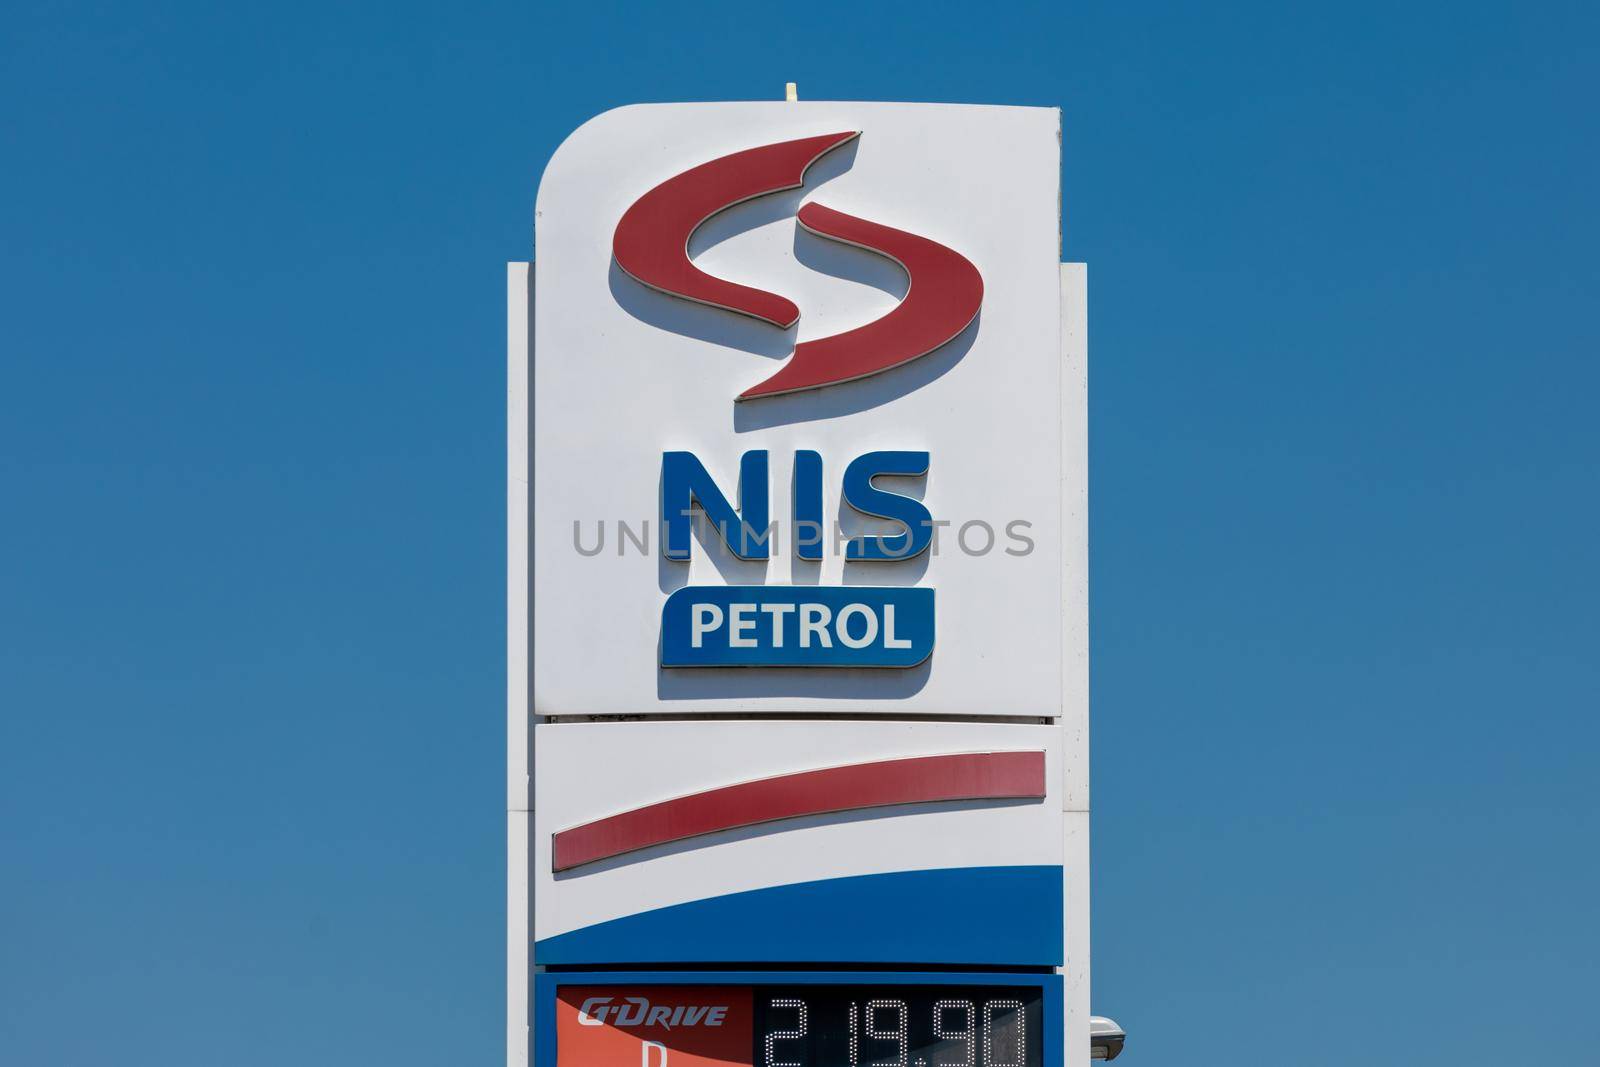 Logo and sign of NIS Petrol on gas station. NIS Petrol (Oil Industry of Serbia) is an largest oil refining company in Serbia by adamr